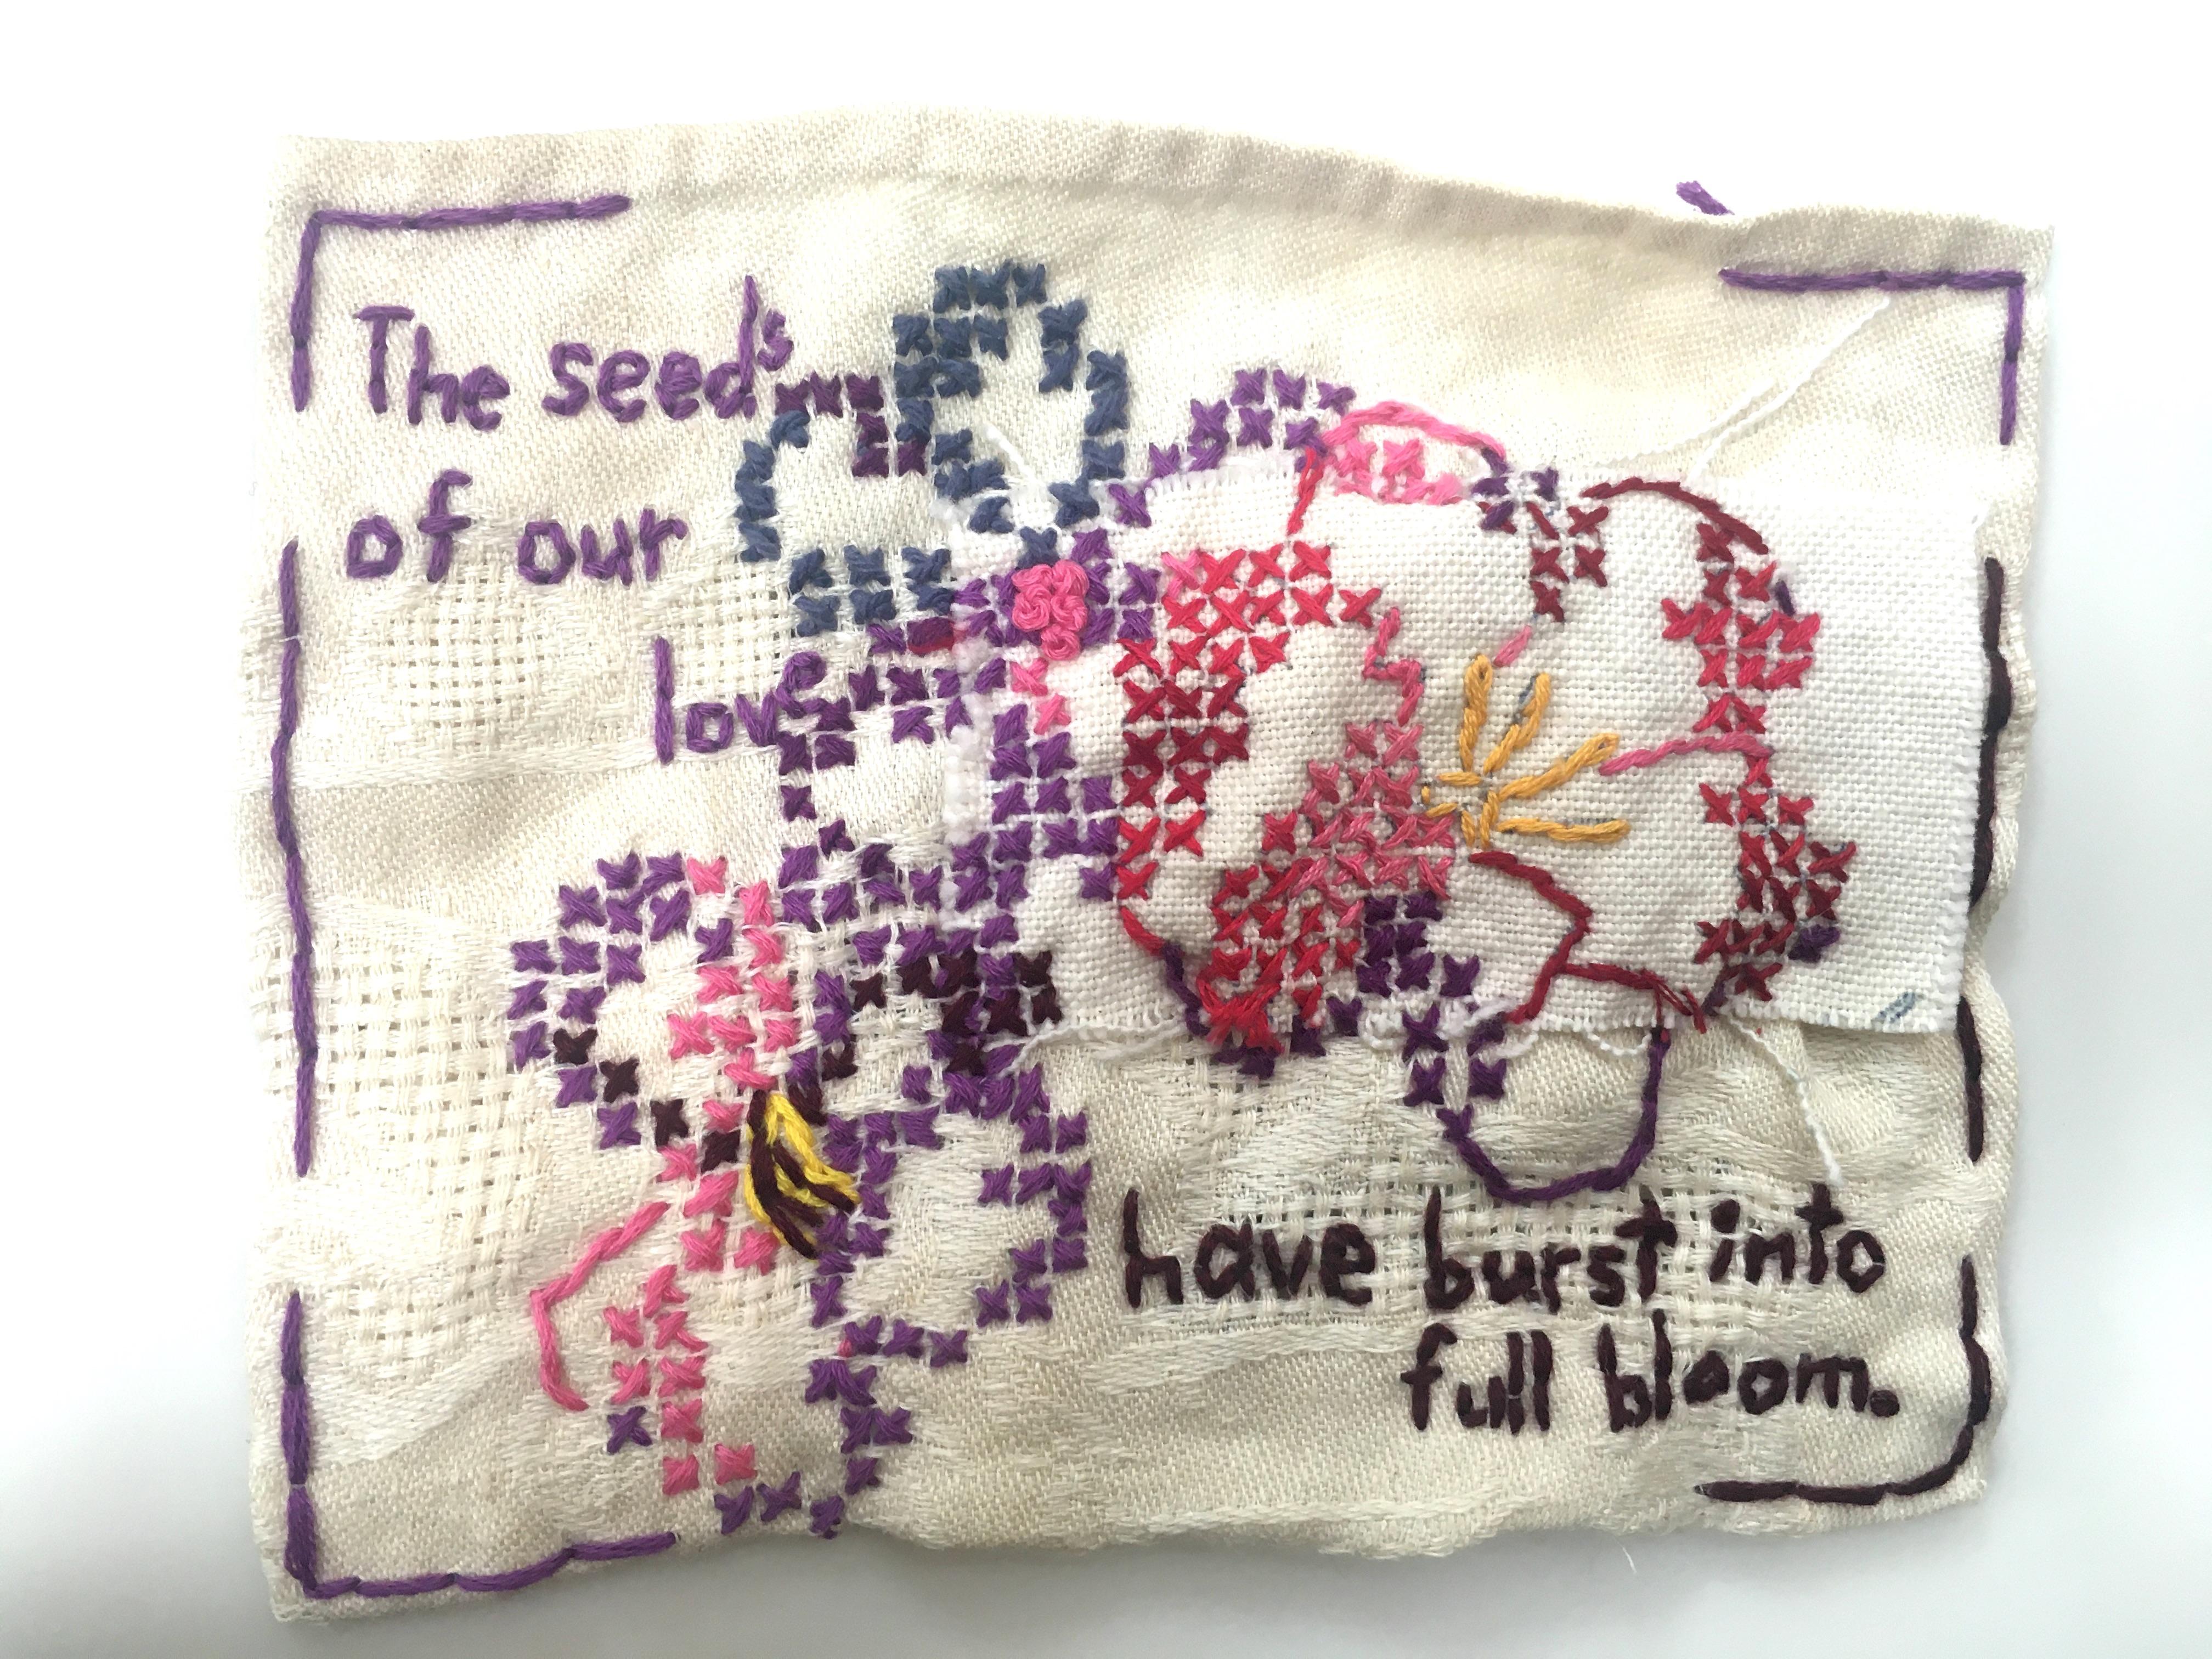 Seeds of Love - love narrative embroidery with flowers on beige vintage fabric